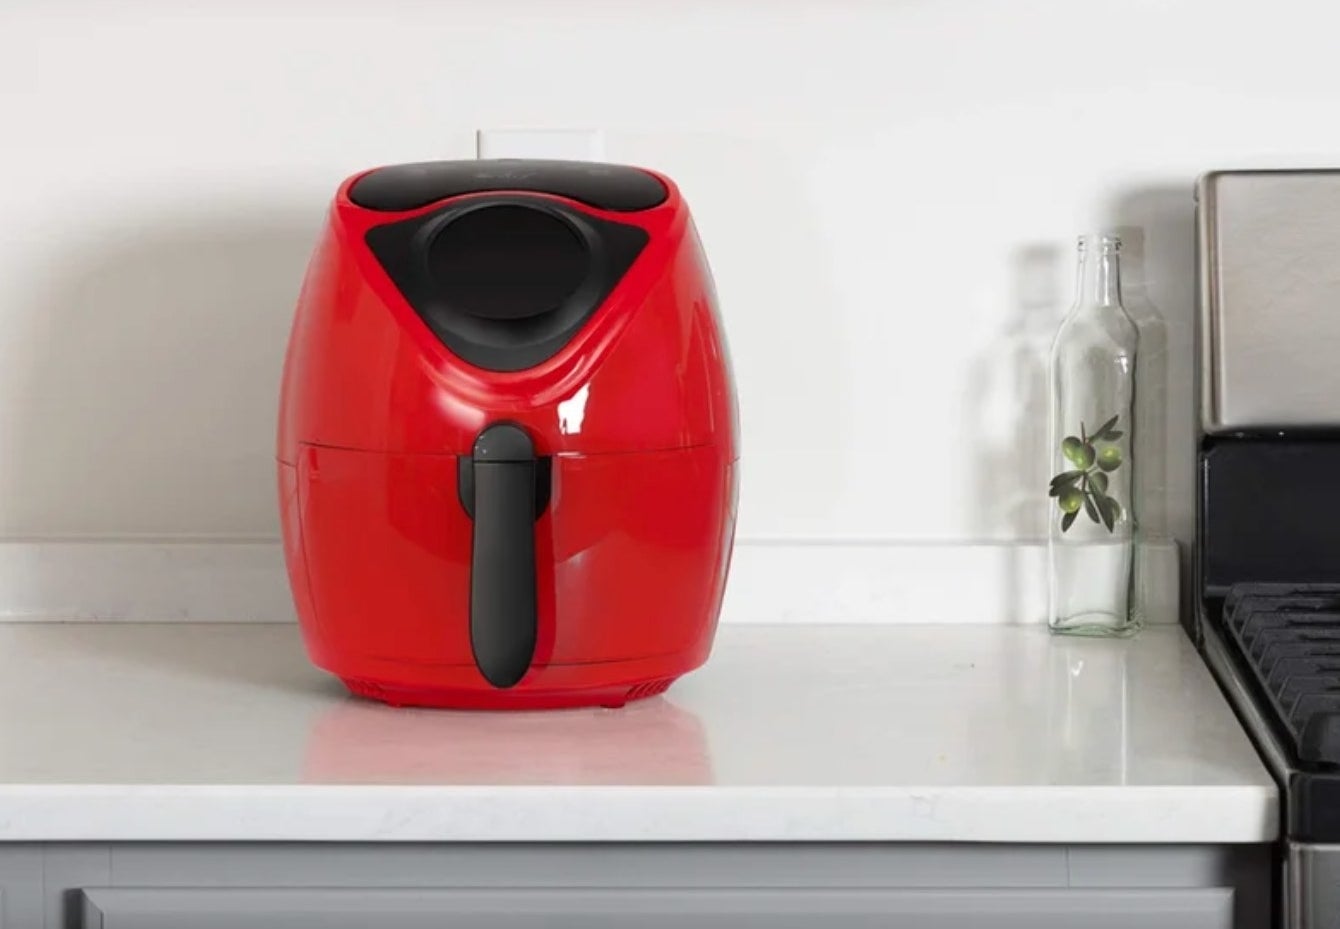 the red air fryer on a kitchen counter